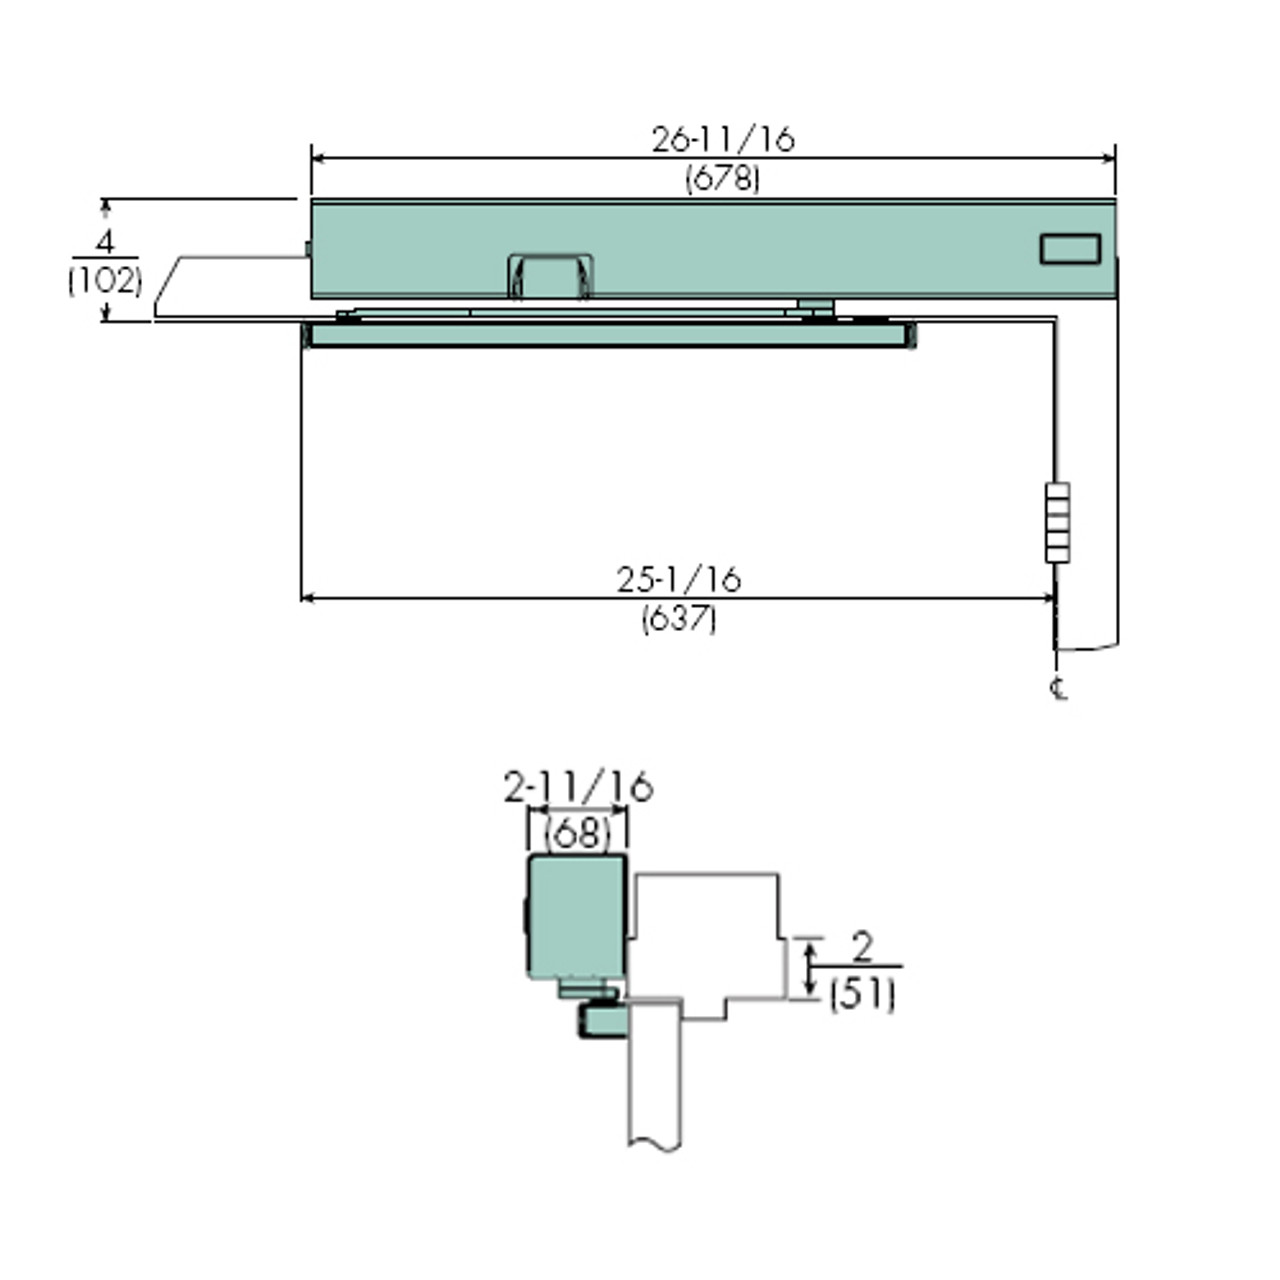 7154SZ-LH-120VAC-689 Norton 7100SZ Series Safe Zone Multi-Point Closer/Holder with Motion Sensor and Pull Side Double Egress Arm and Slide Track in Aluminum Finish